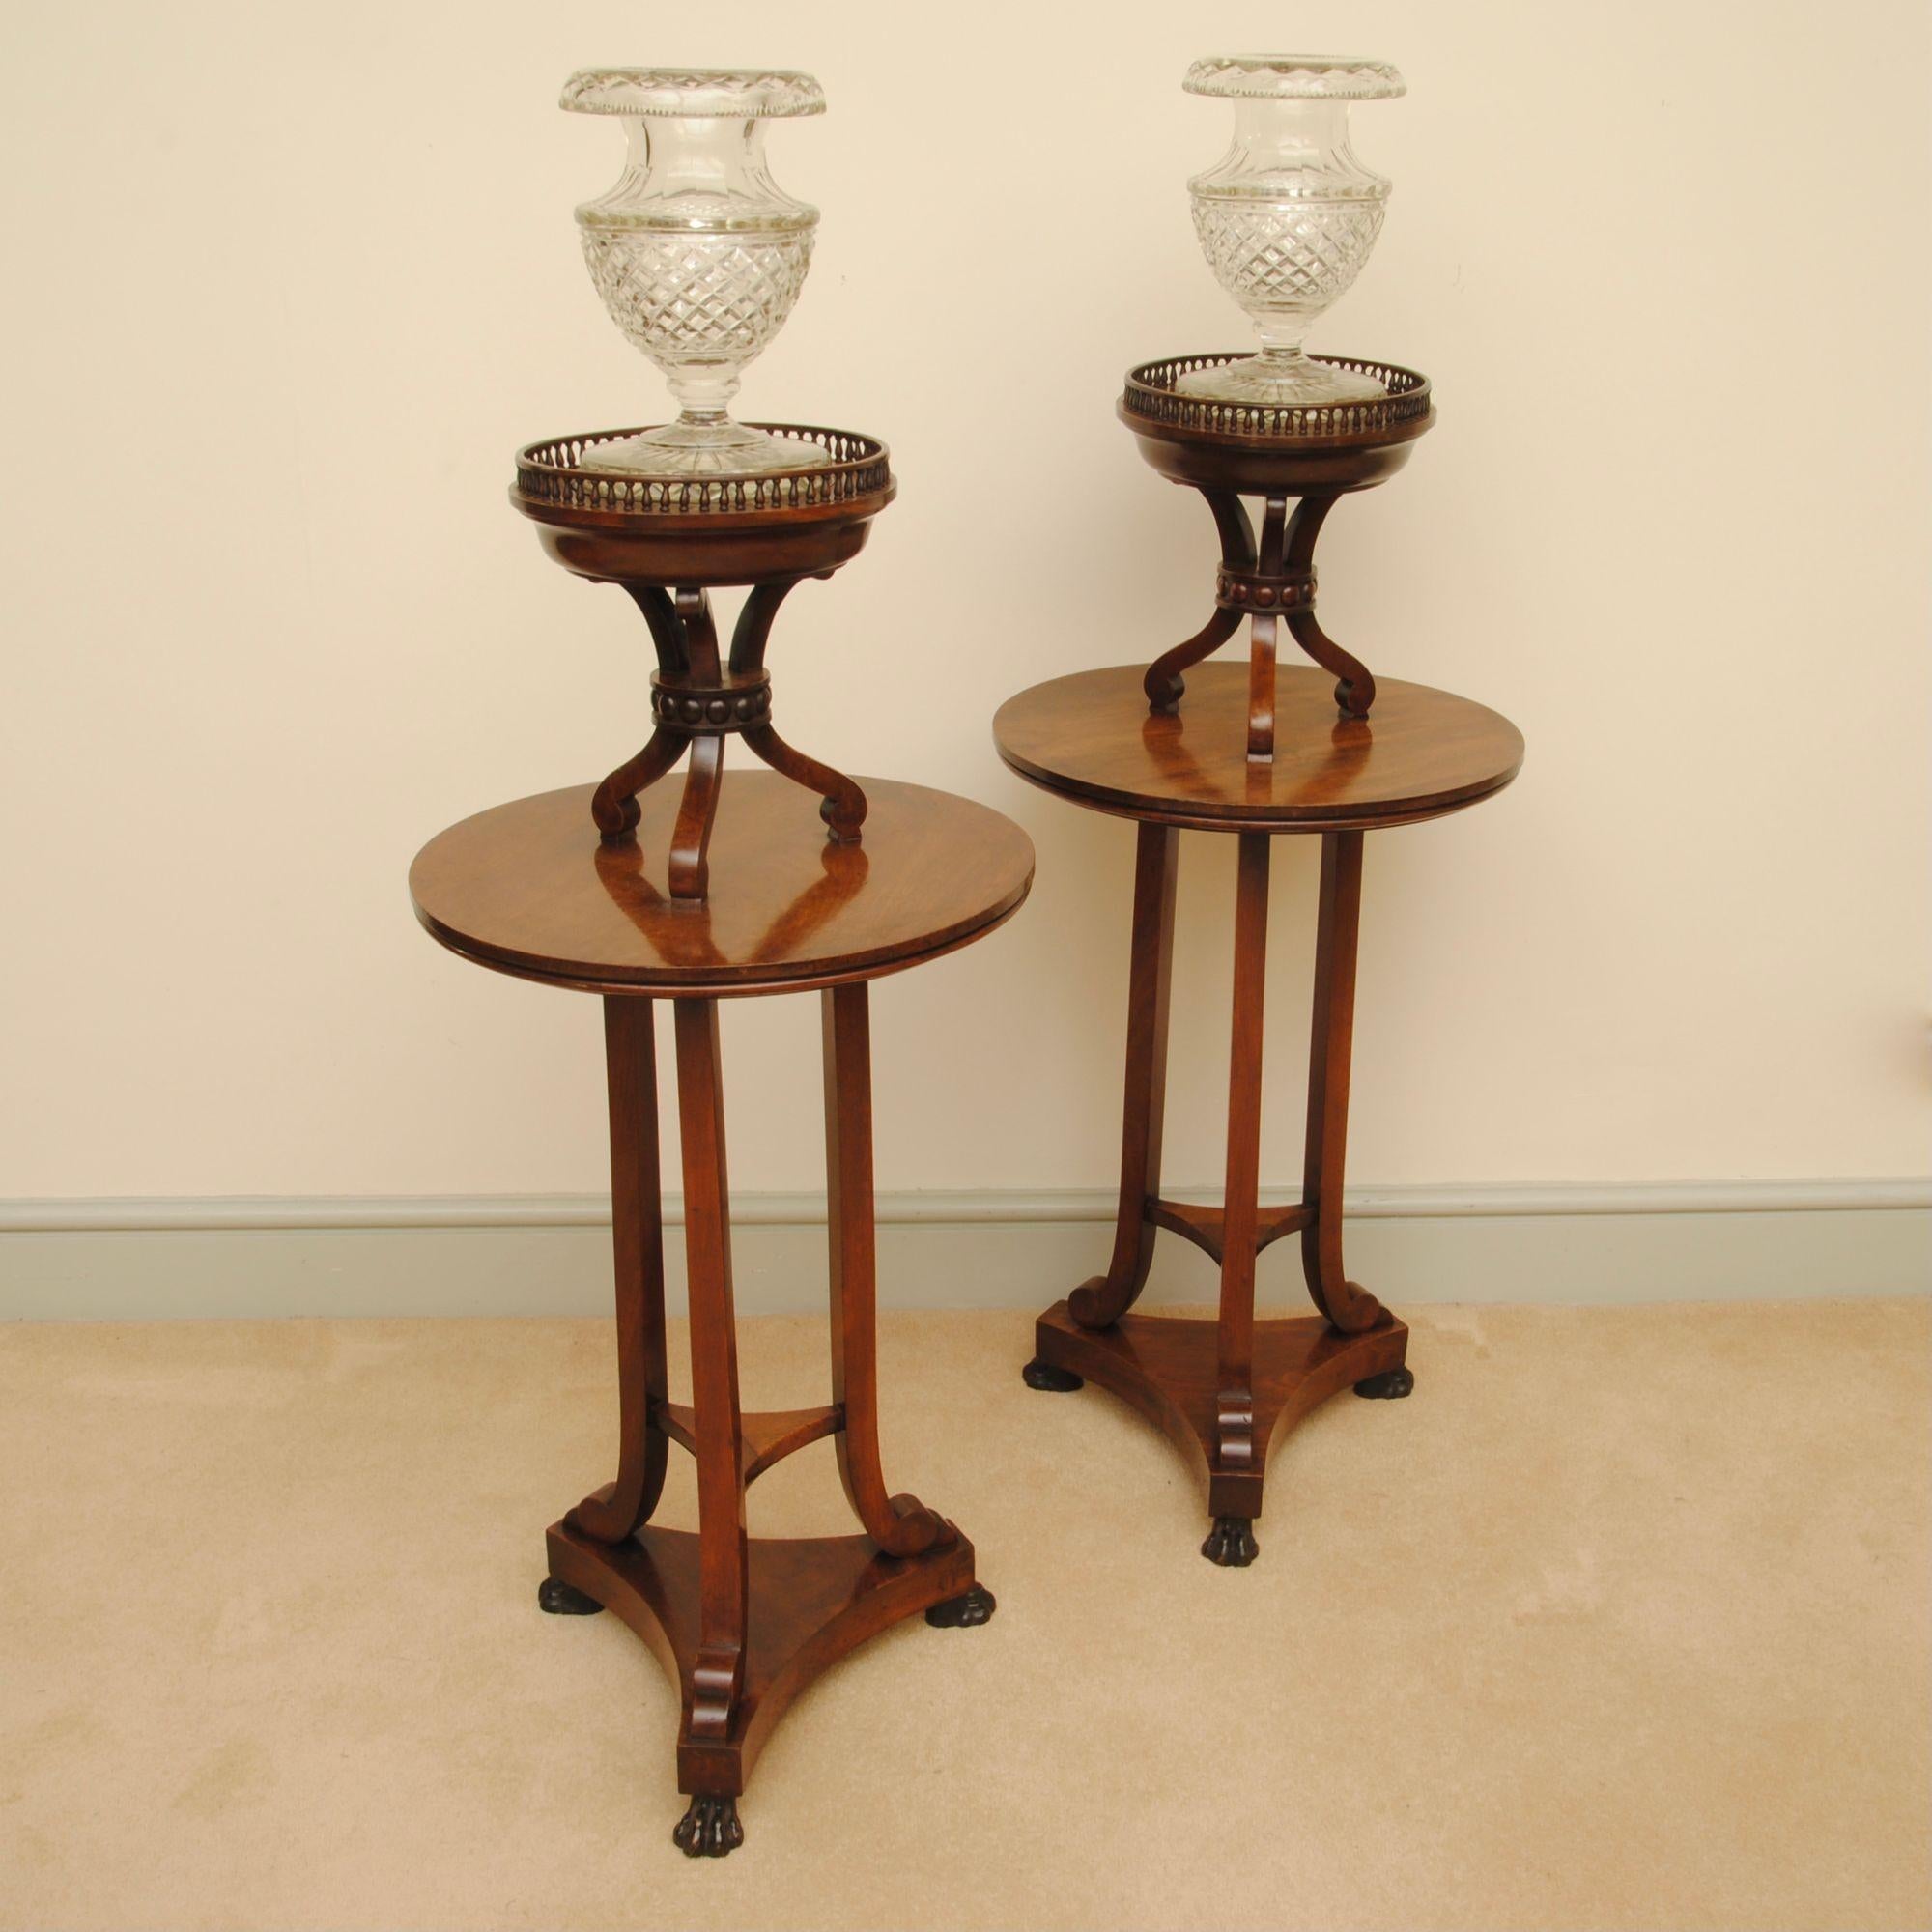 A very smart pair of Regency period mahogany stands or tourchers with the cut glass vases included in the price. These lovely stands sat in the home of a retired antique dealer for as long as I can remember always with fresh flowers in the vases.